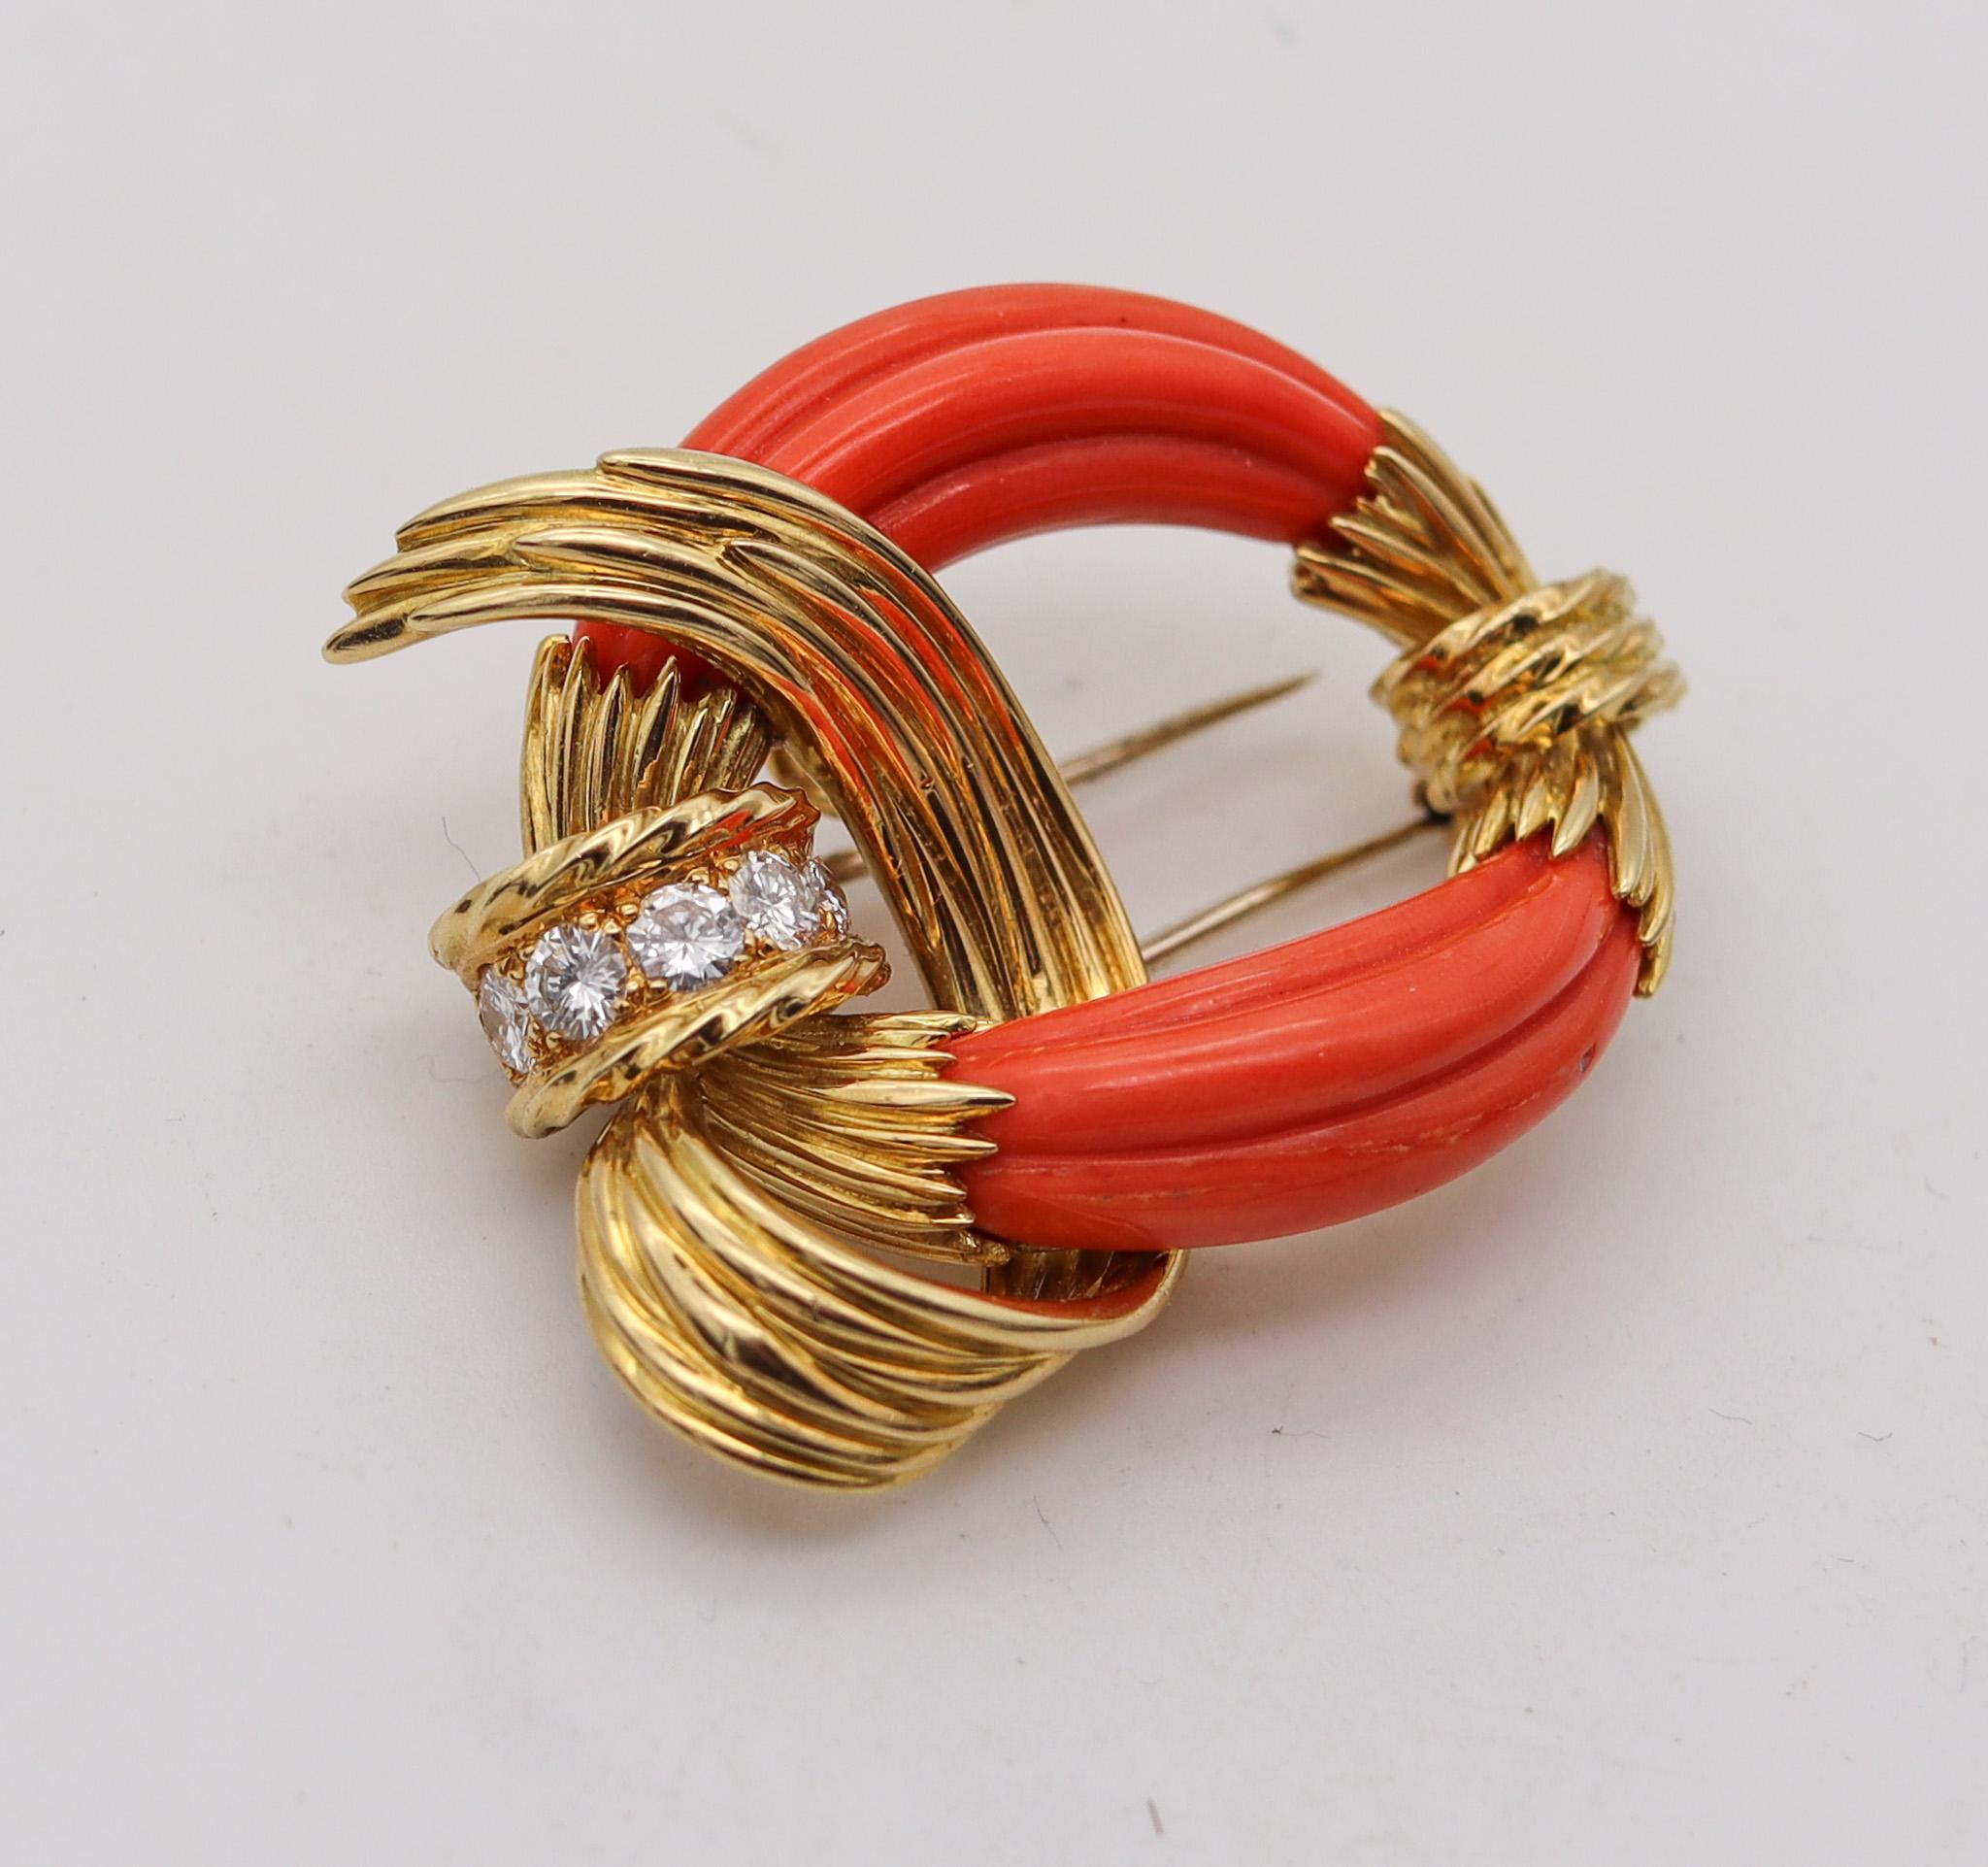 Cabochon Chaumet Paris 1960 Modernist Pendant Brooch In 18Kt Gold With Coral And Diamonds For Sale